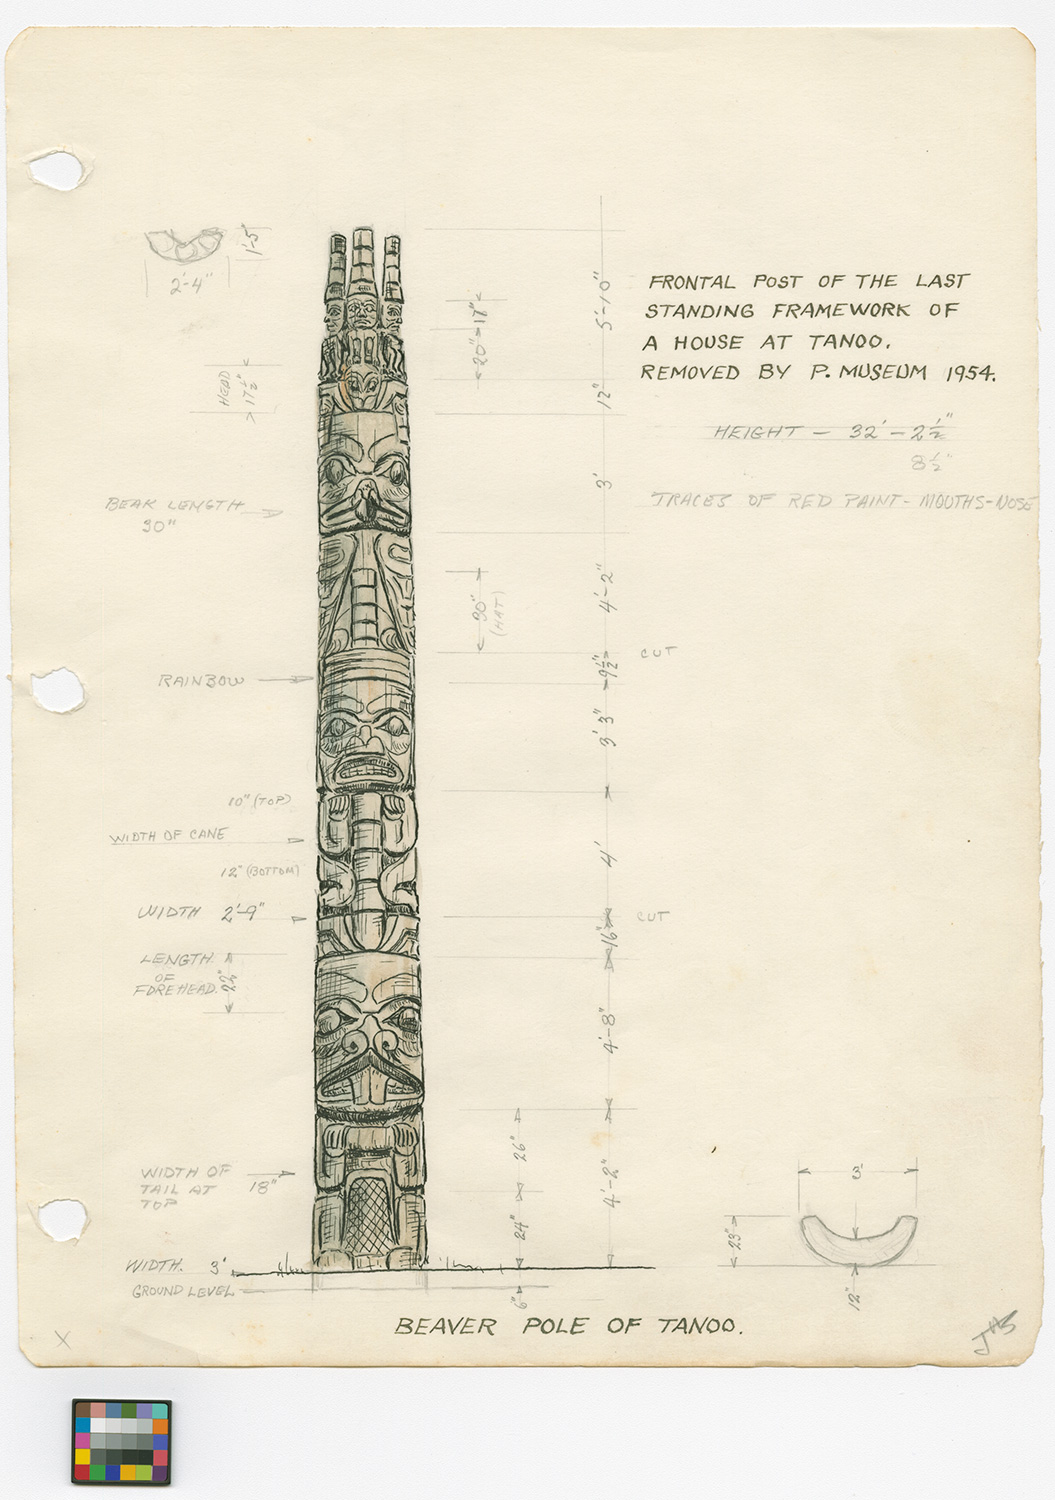 Pencil drawing and dimensions of the house frontal pole by John Smyly.